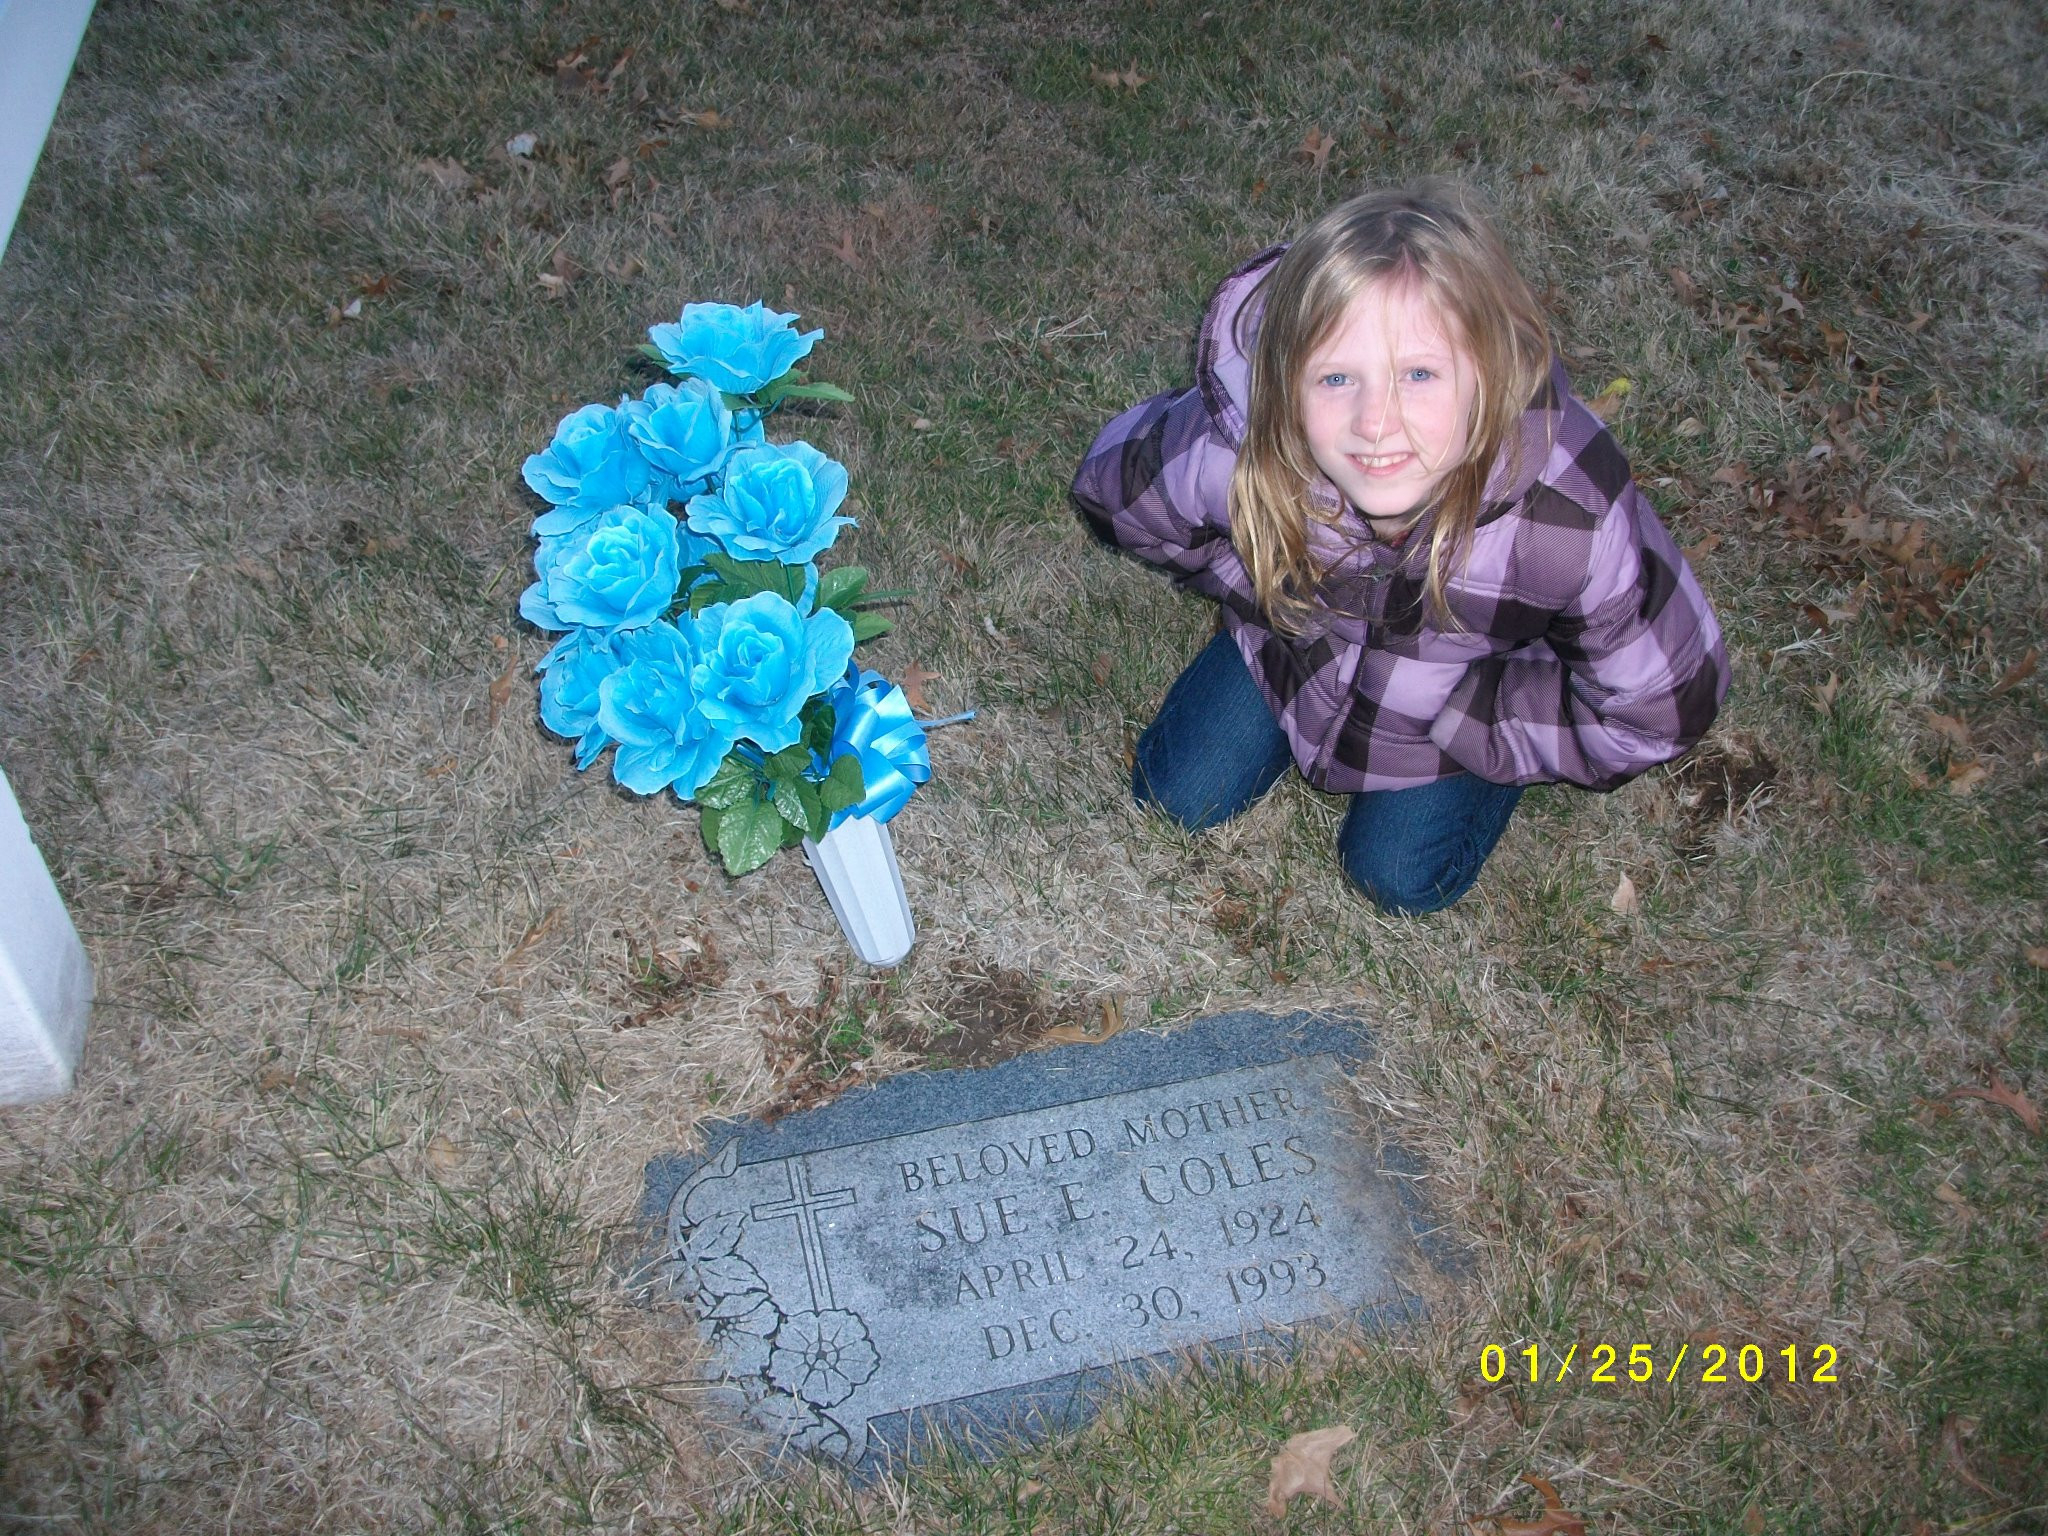 Sues Grave and her Great Granddaughter Mckenzie.